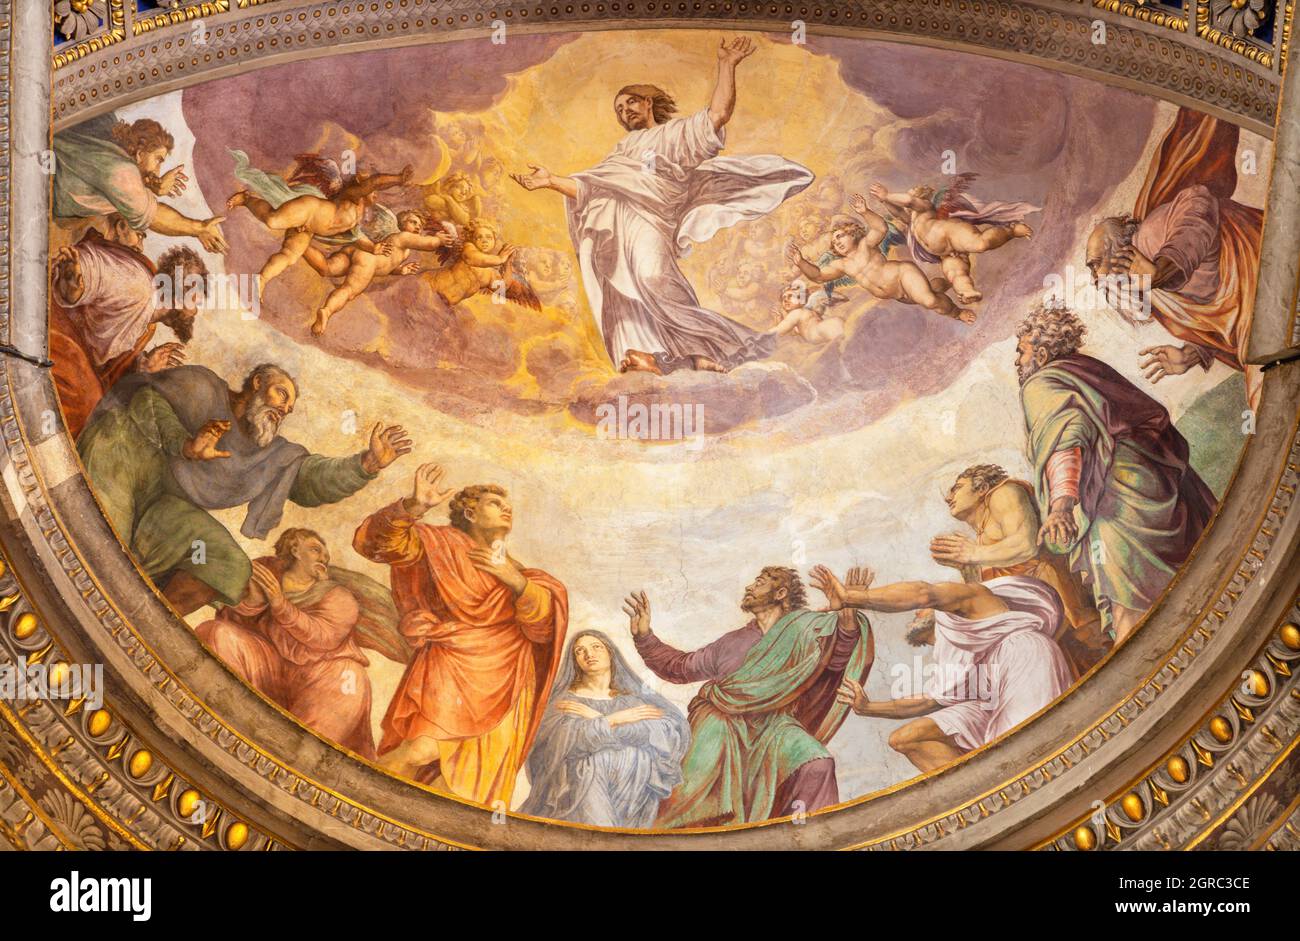 ROME, ITALY - SEPTEMBER 1, 2021:  The Ascension of the Lord fresco in church Santa Maria dell Anima by Francesco Salviati from 16. cent. Stock Photo